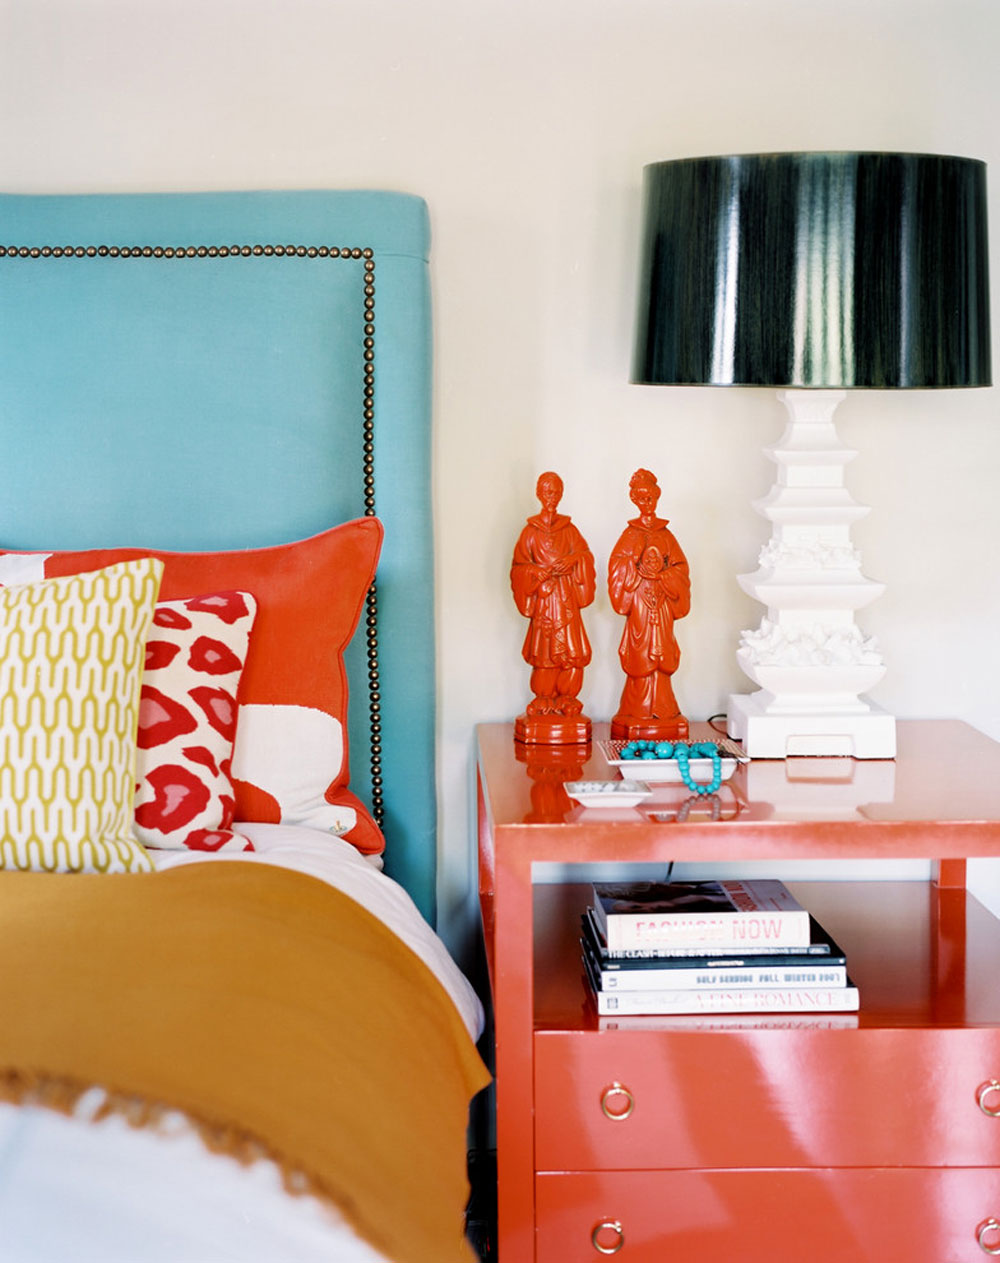 Betsy-Burnham-by-Burnham-Design The coral color: How to decorate beautiful interiors with it